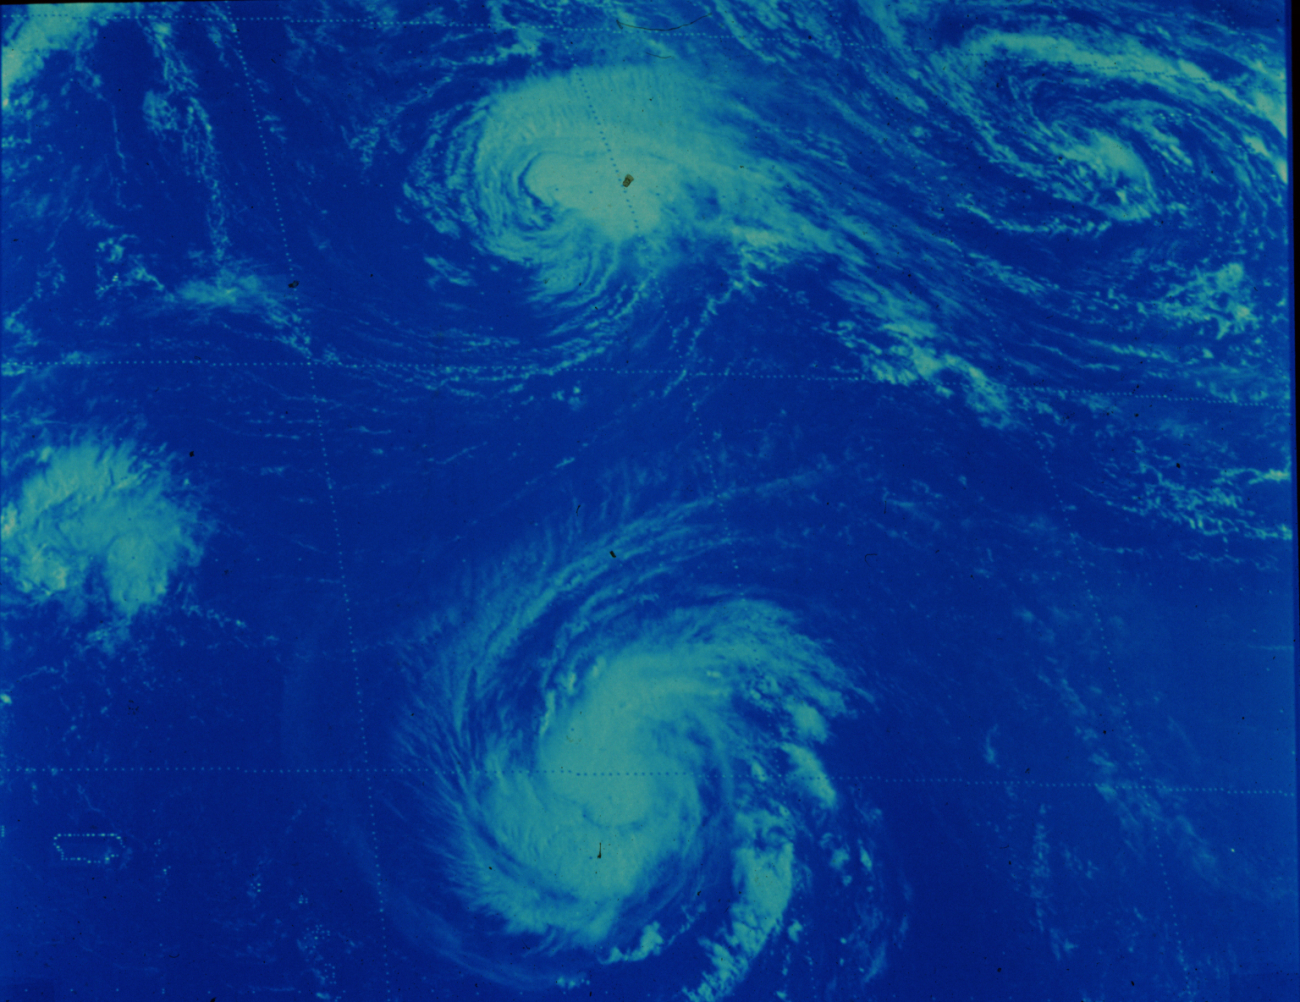 Hurricanes Emmy and Frances in the north central Atlantic Ocean